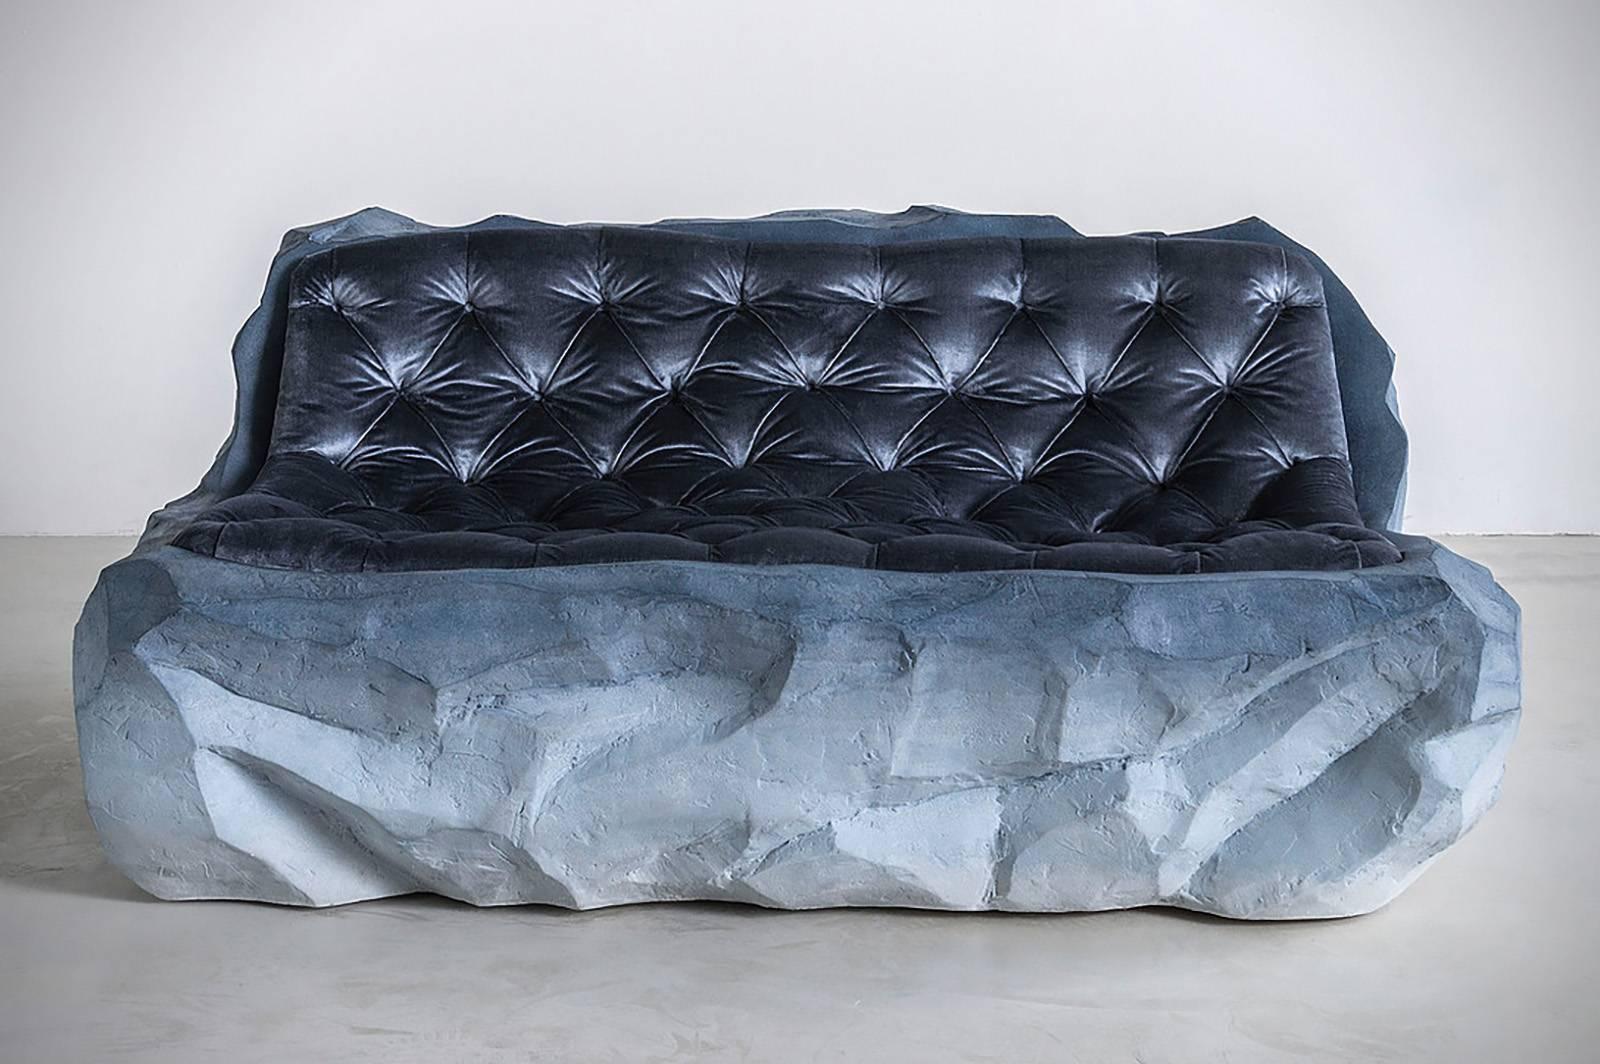 Drift (sofa)
Sand and silk velvet
40” H x 60” W x 28” D
Edition of 3
This work was part of the solo exhibition, 